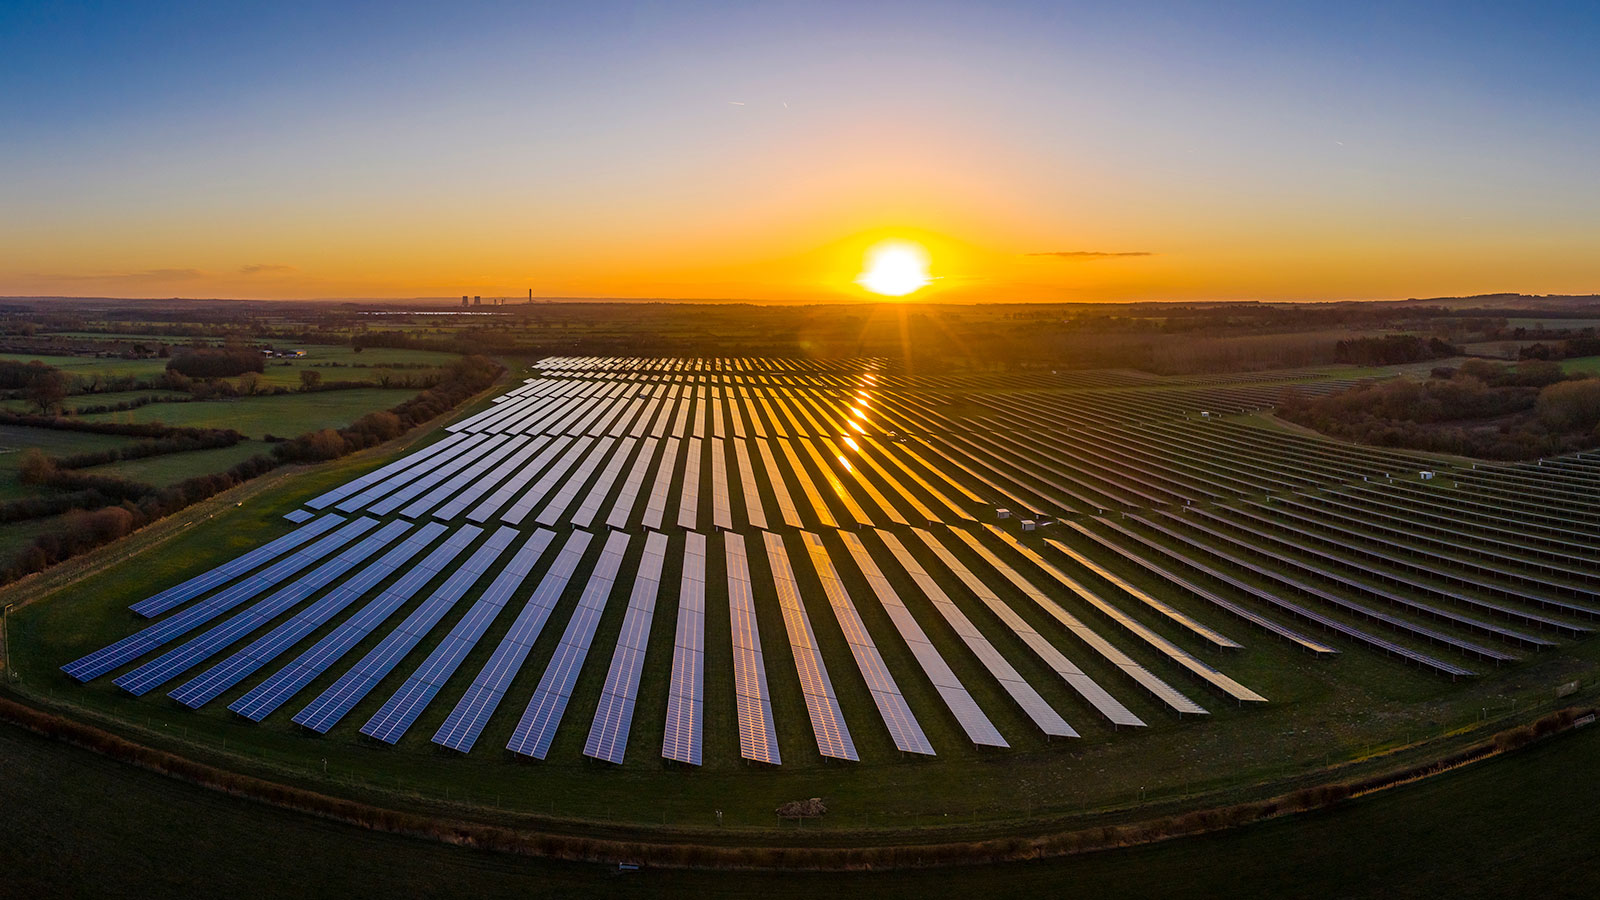 Planning approval has been granted for a new 15.23 MW solar farm in Yeovil, Somerset.